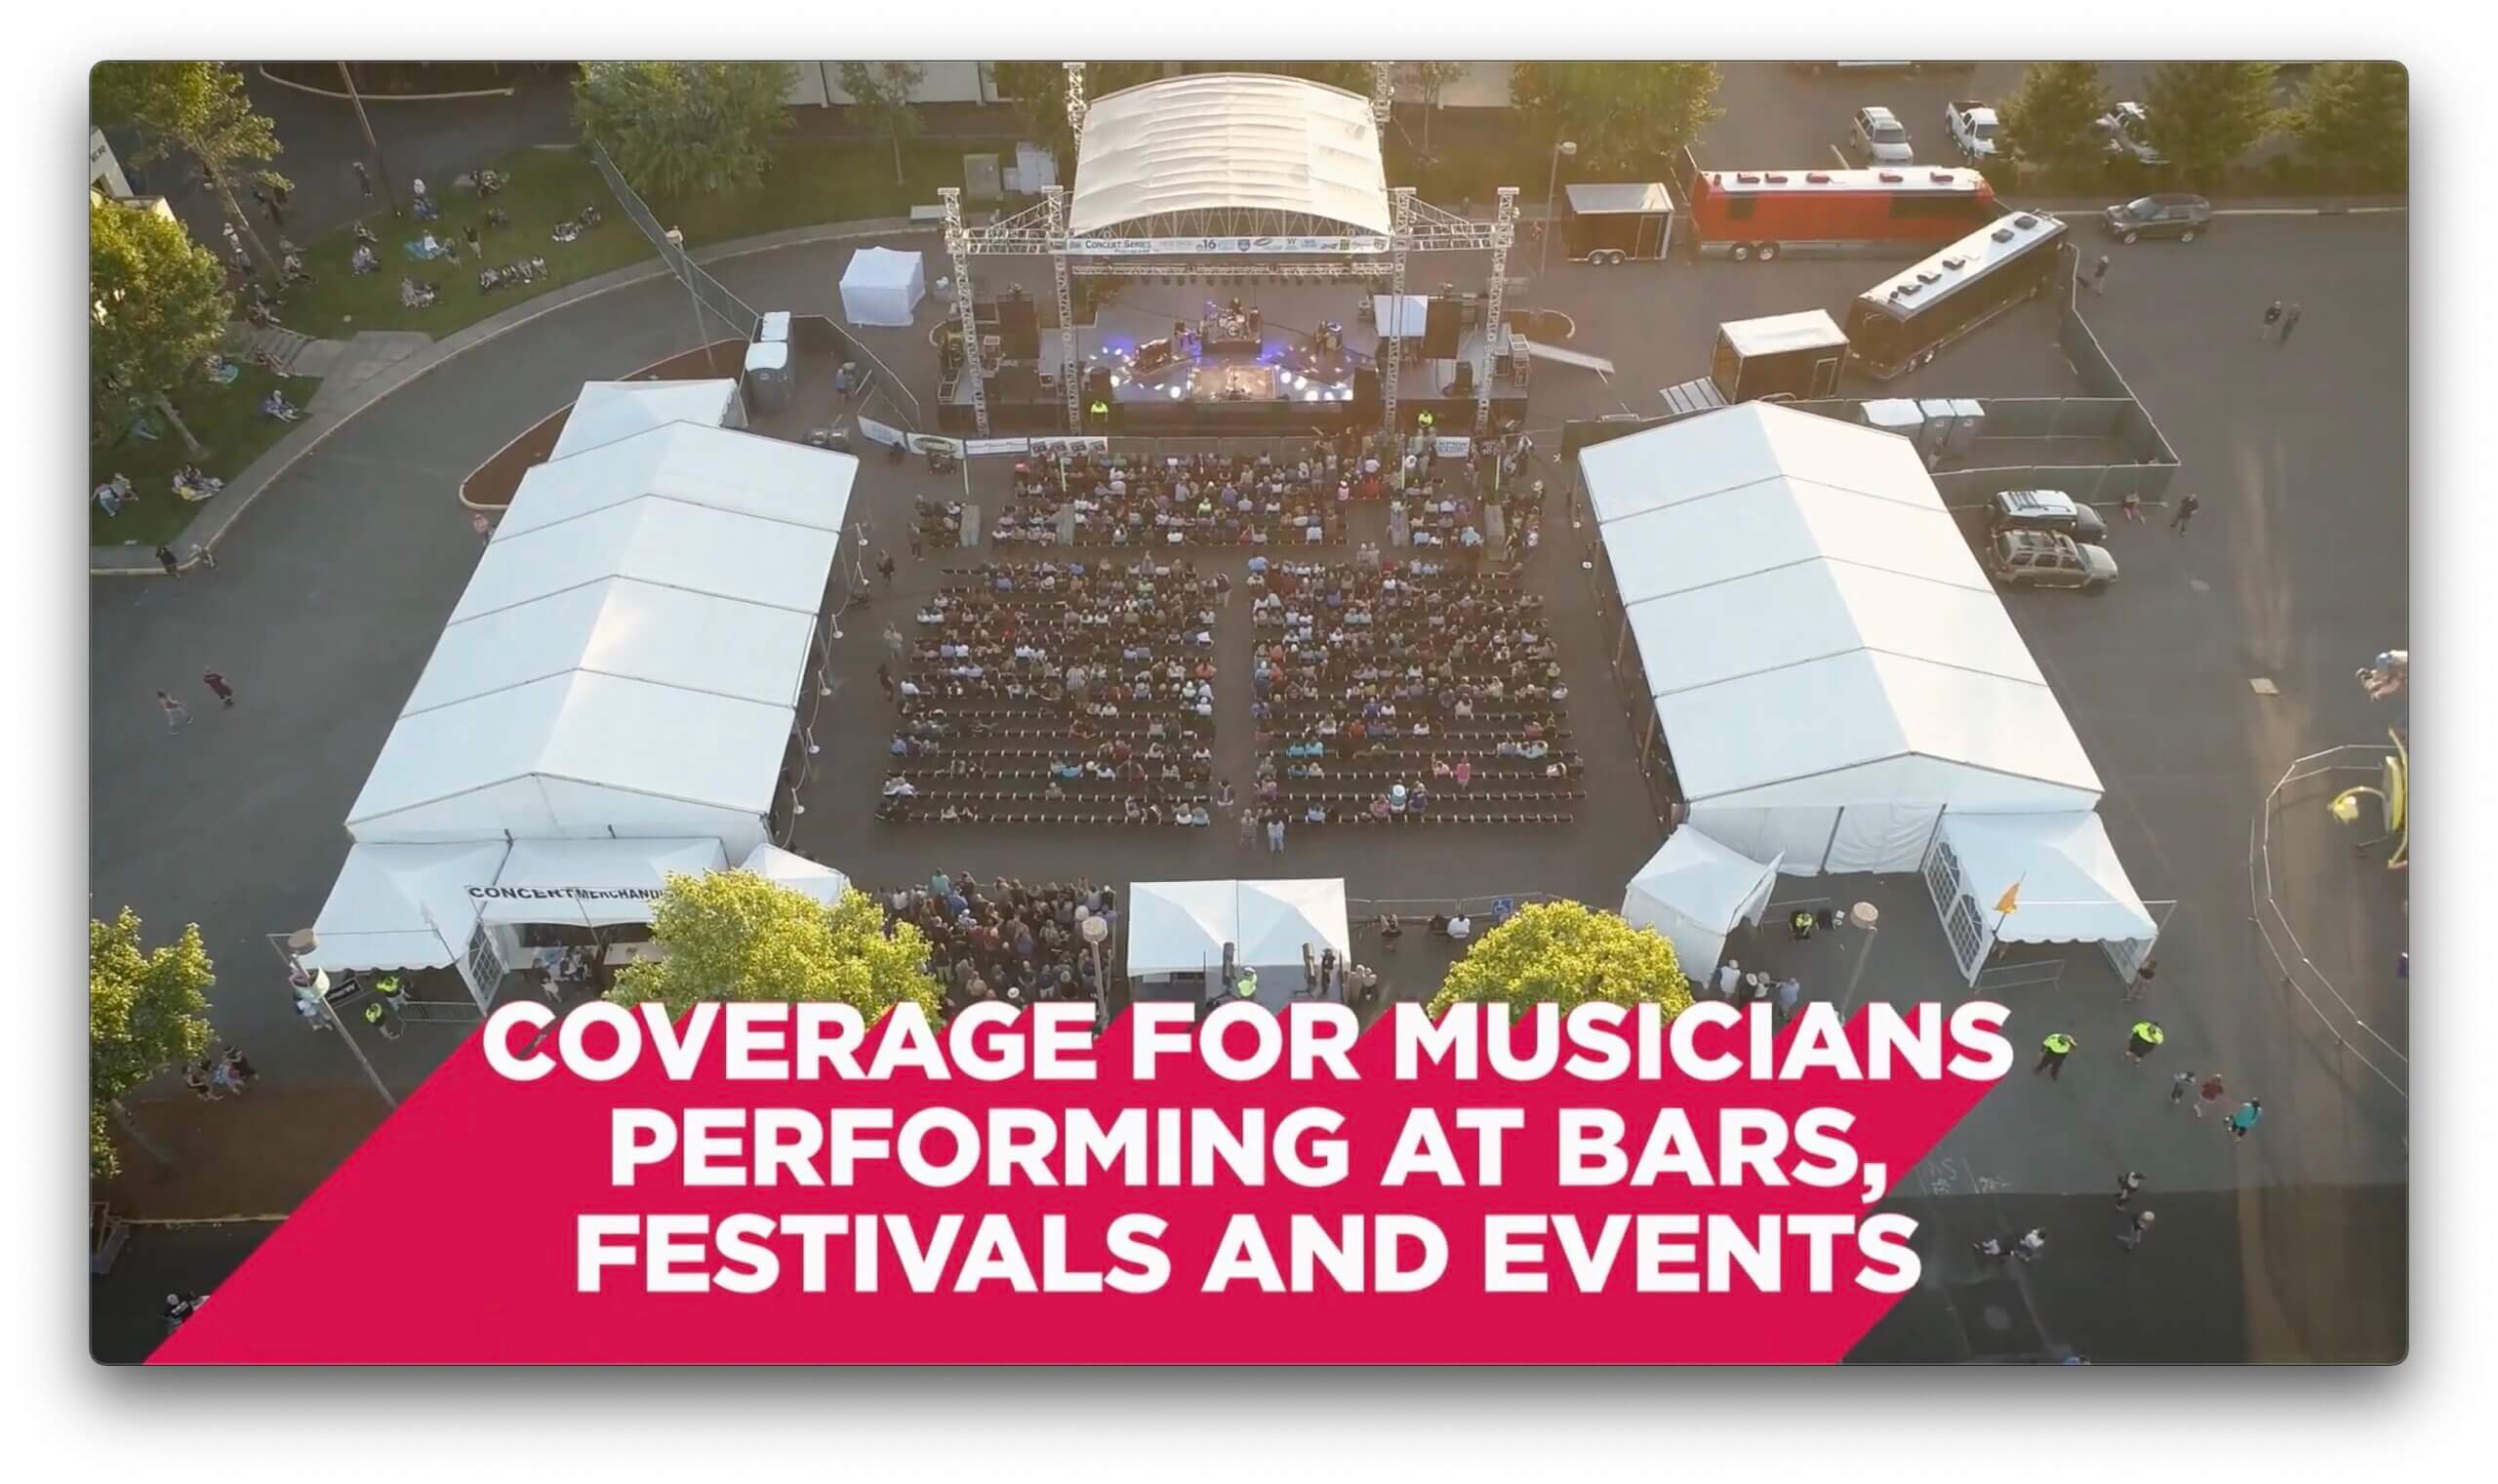 WATCH: How to Obtain Insurance For Your Live Performances